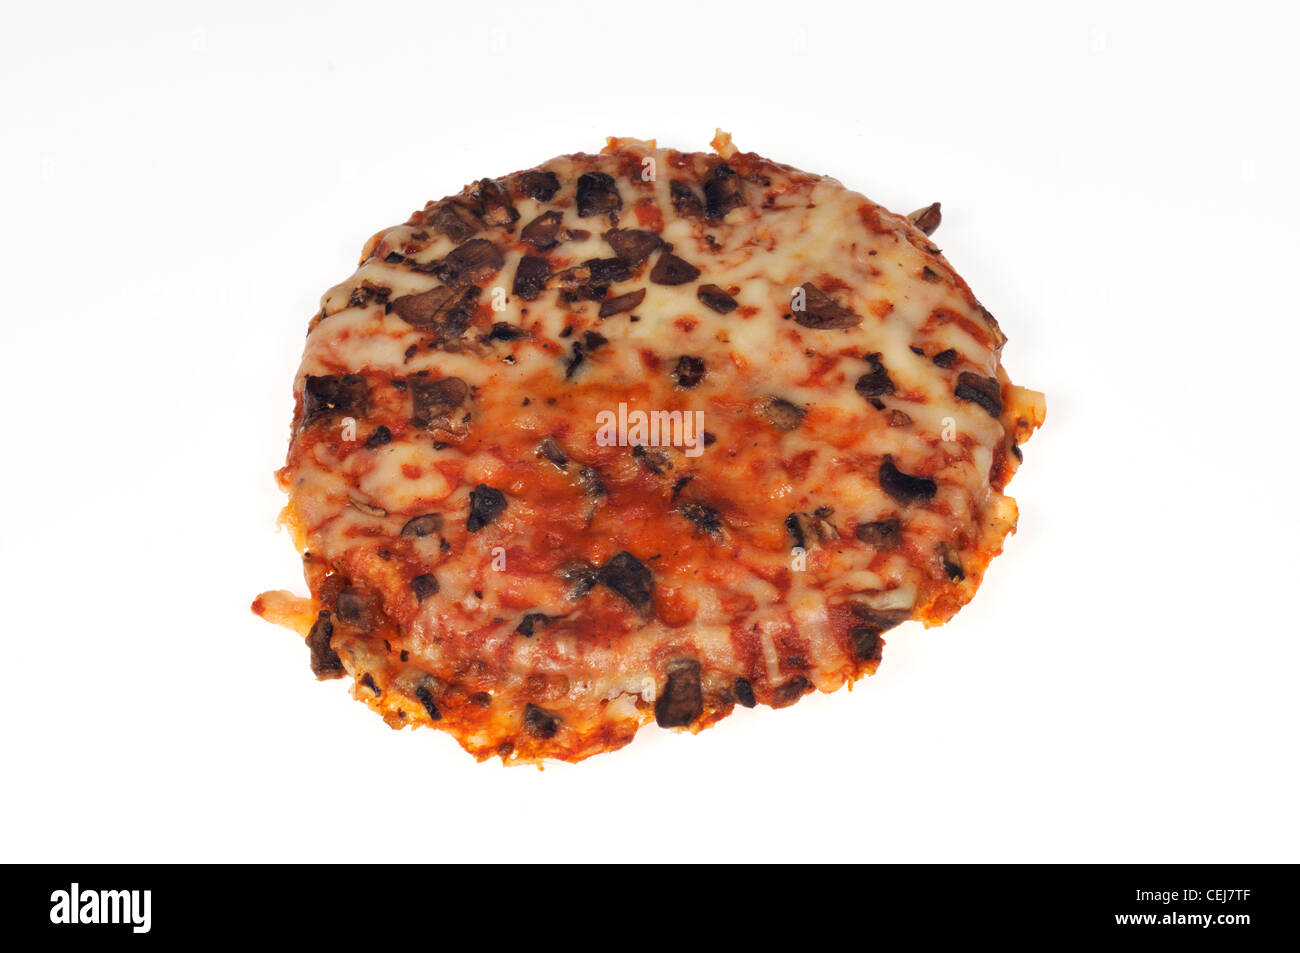 Cooked mushroom pizza on white background cutout Stock Photo